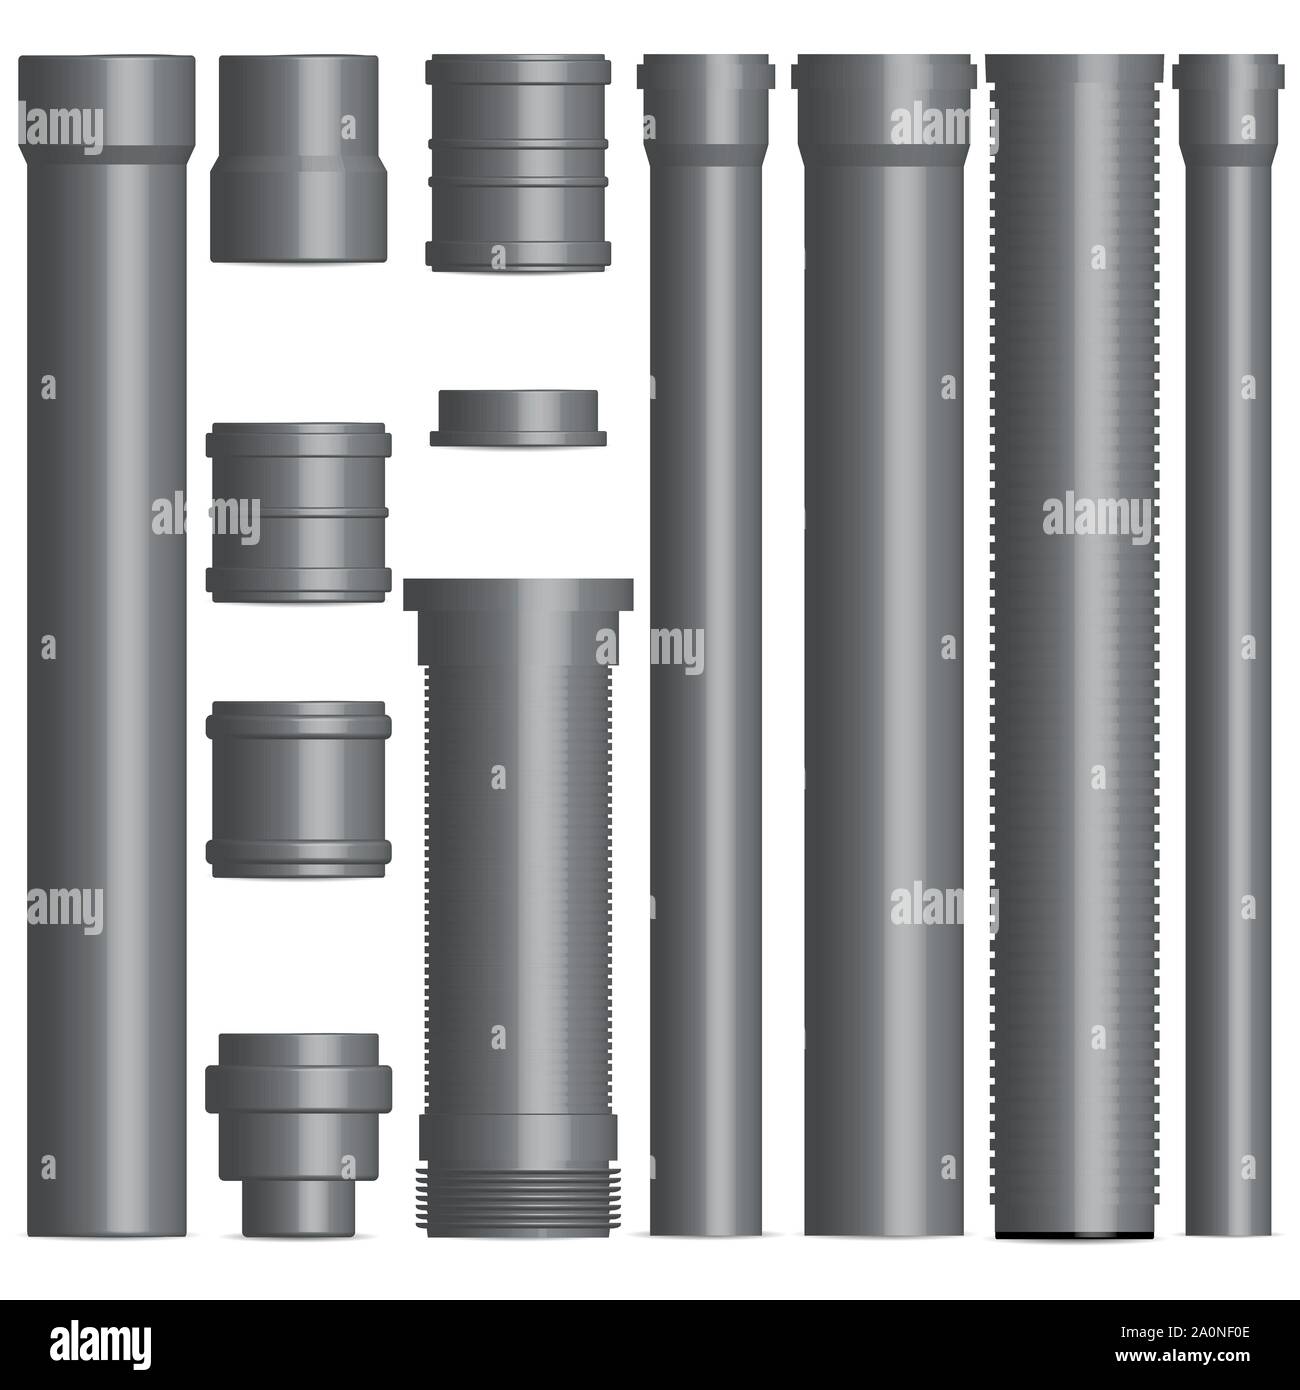 Set of various plastic pipes for sewage, water pipe and connecting flanges isolated on a white background. Front view, vector illustration. Stock Vector